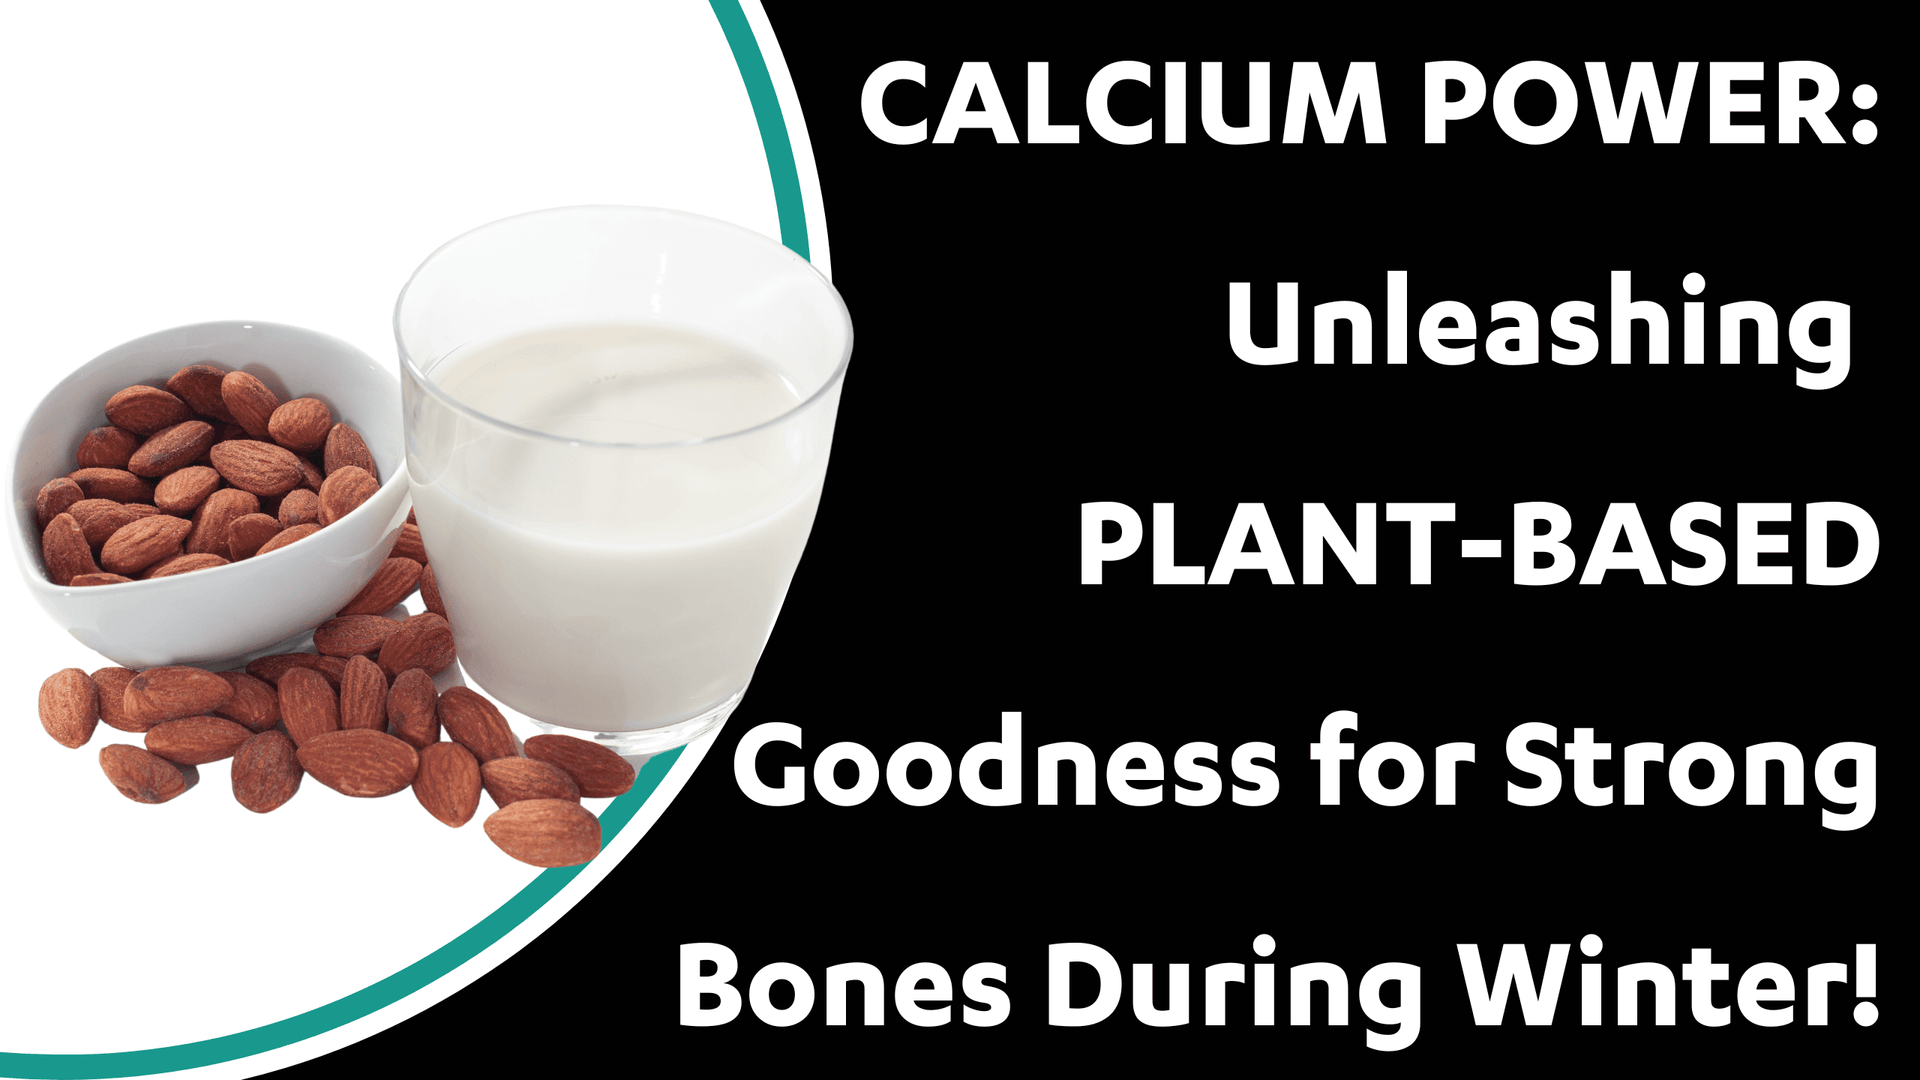 Calcium Power: Unleashing Plant-Based Goodness for Strong Bones in Winter!